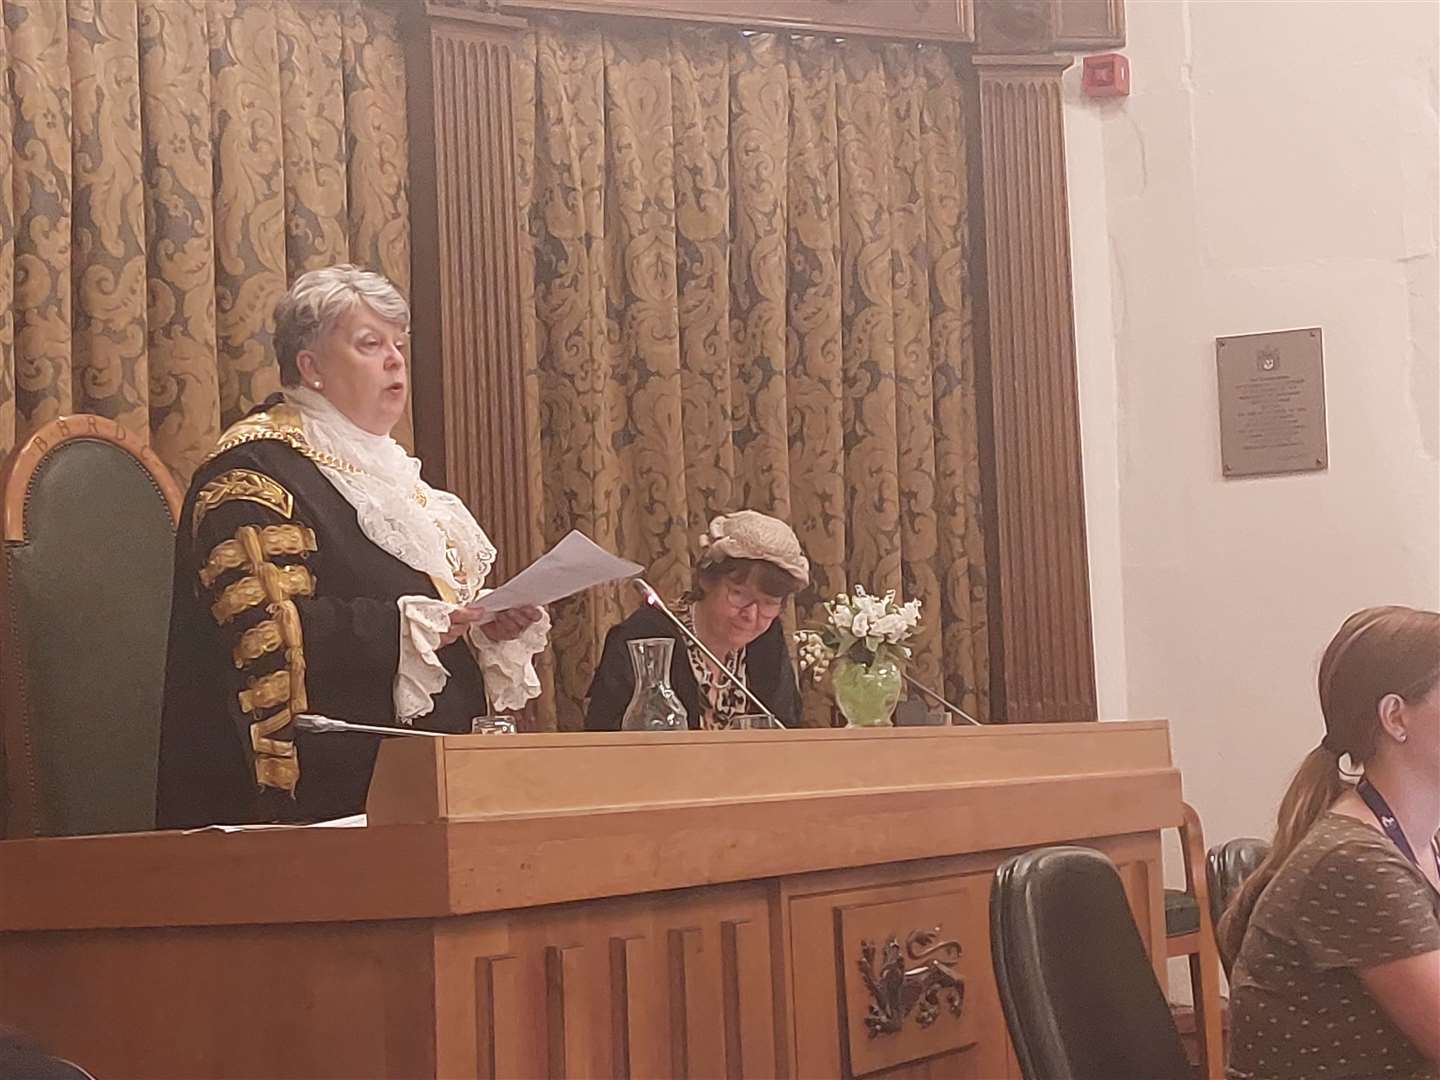 Cllr Dekker was voted Lord Mayor against her party leader's wishes